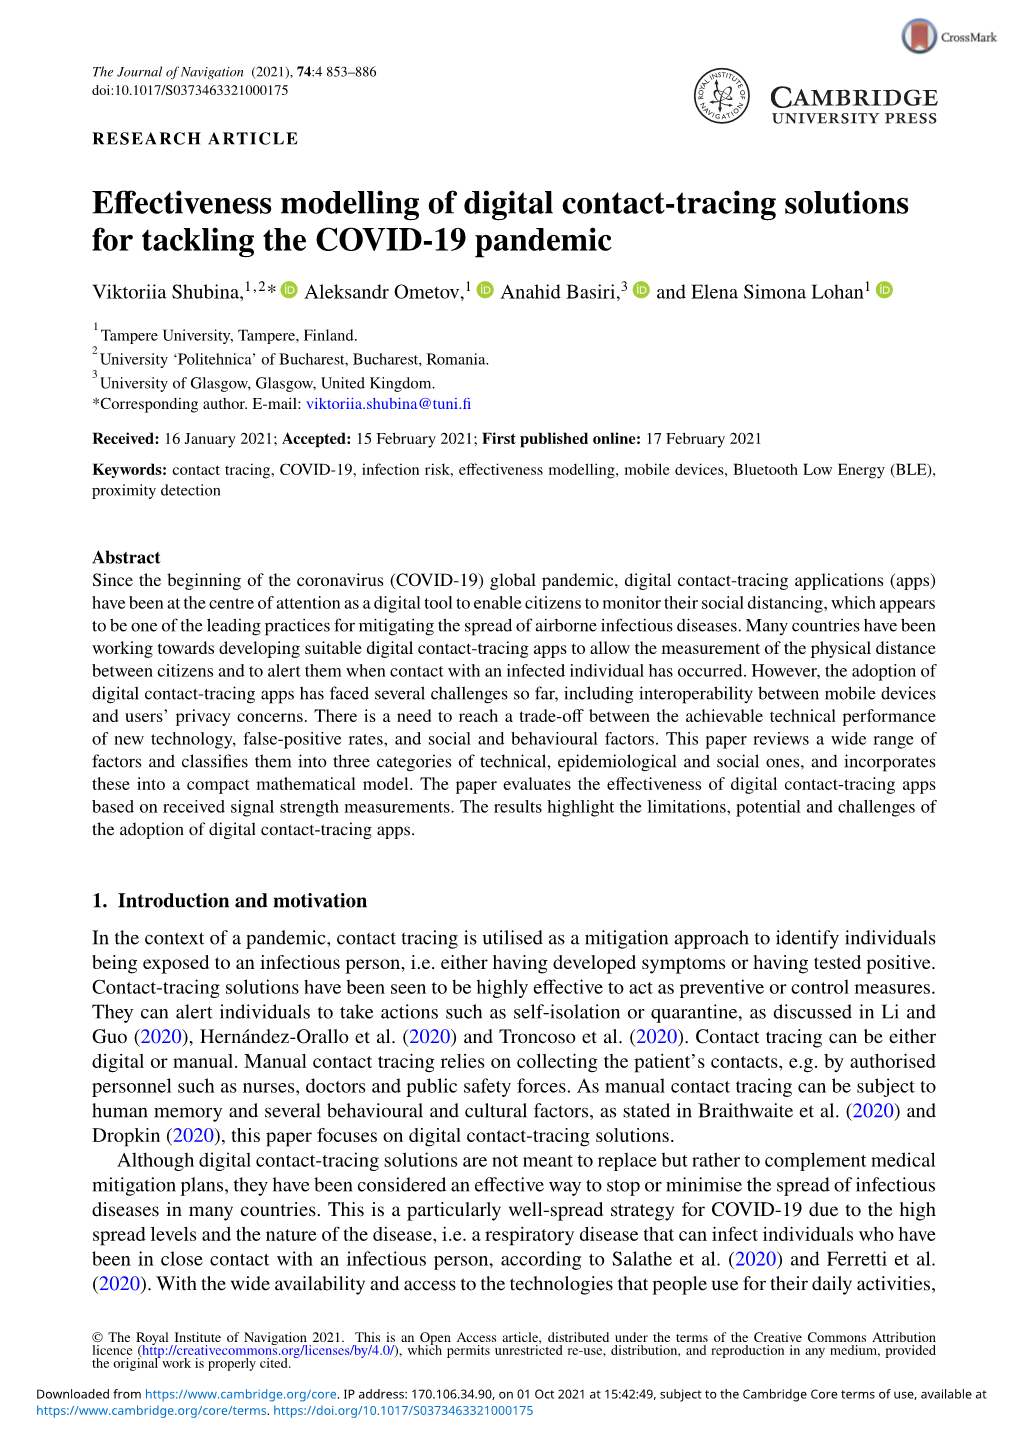 Effectiveness Modelling of Digital Contact-Tracing Solutions for Tackling the COVID-19 Pandemic